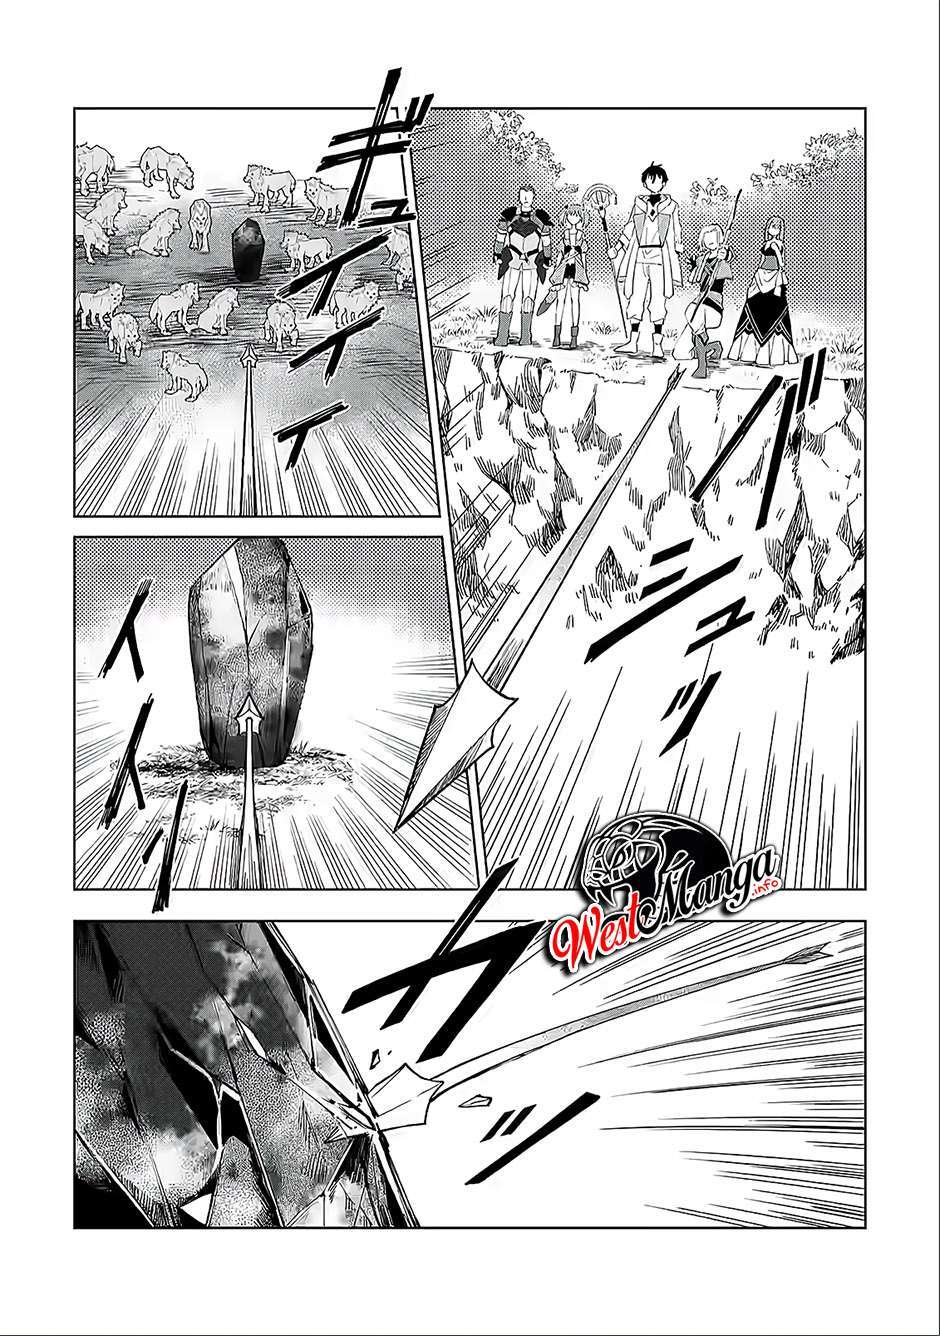 KomiknThe White Mage Who Was Banished From the Hero’s Party Is Picked up by an S Rank Adventurer ~ This White Mage Is Too Out of the Ordinary! Chapter 4